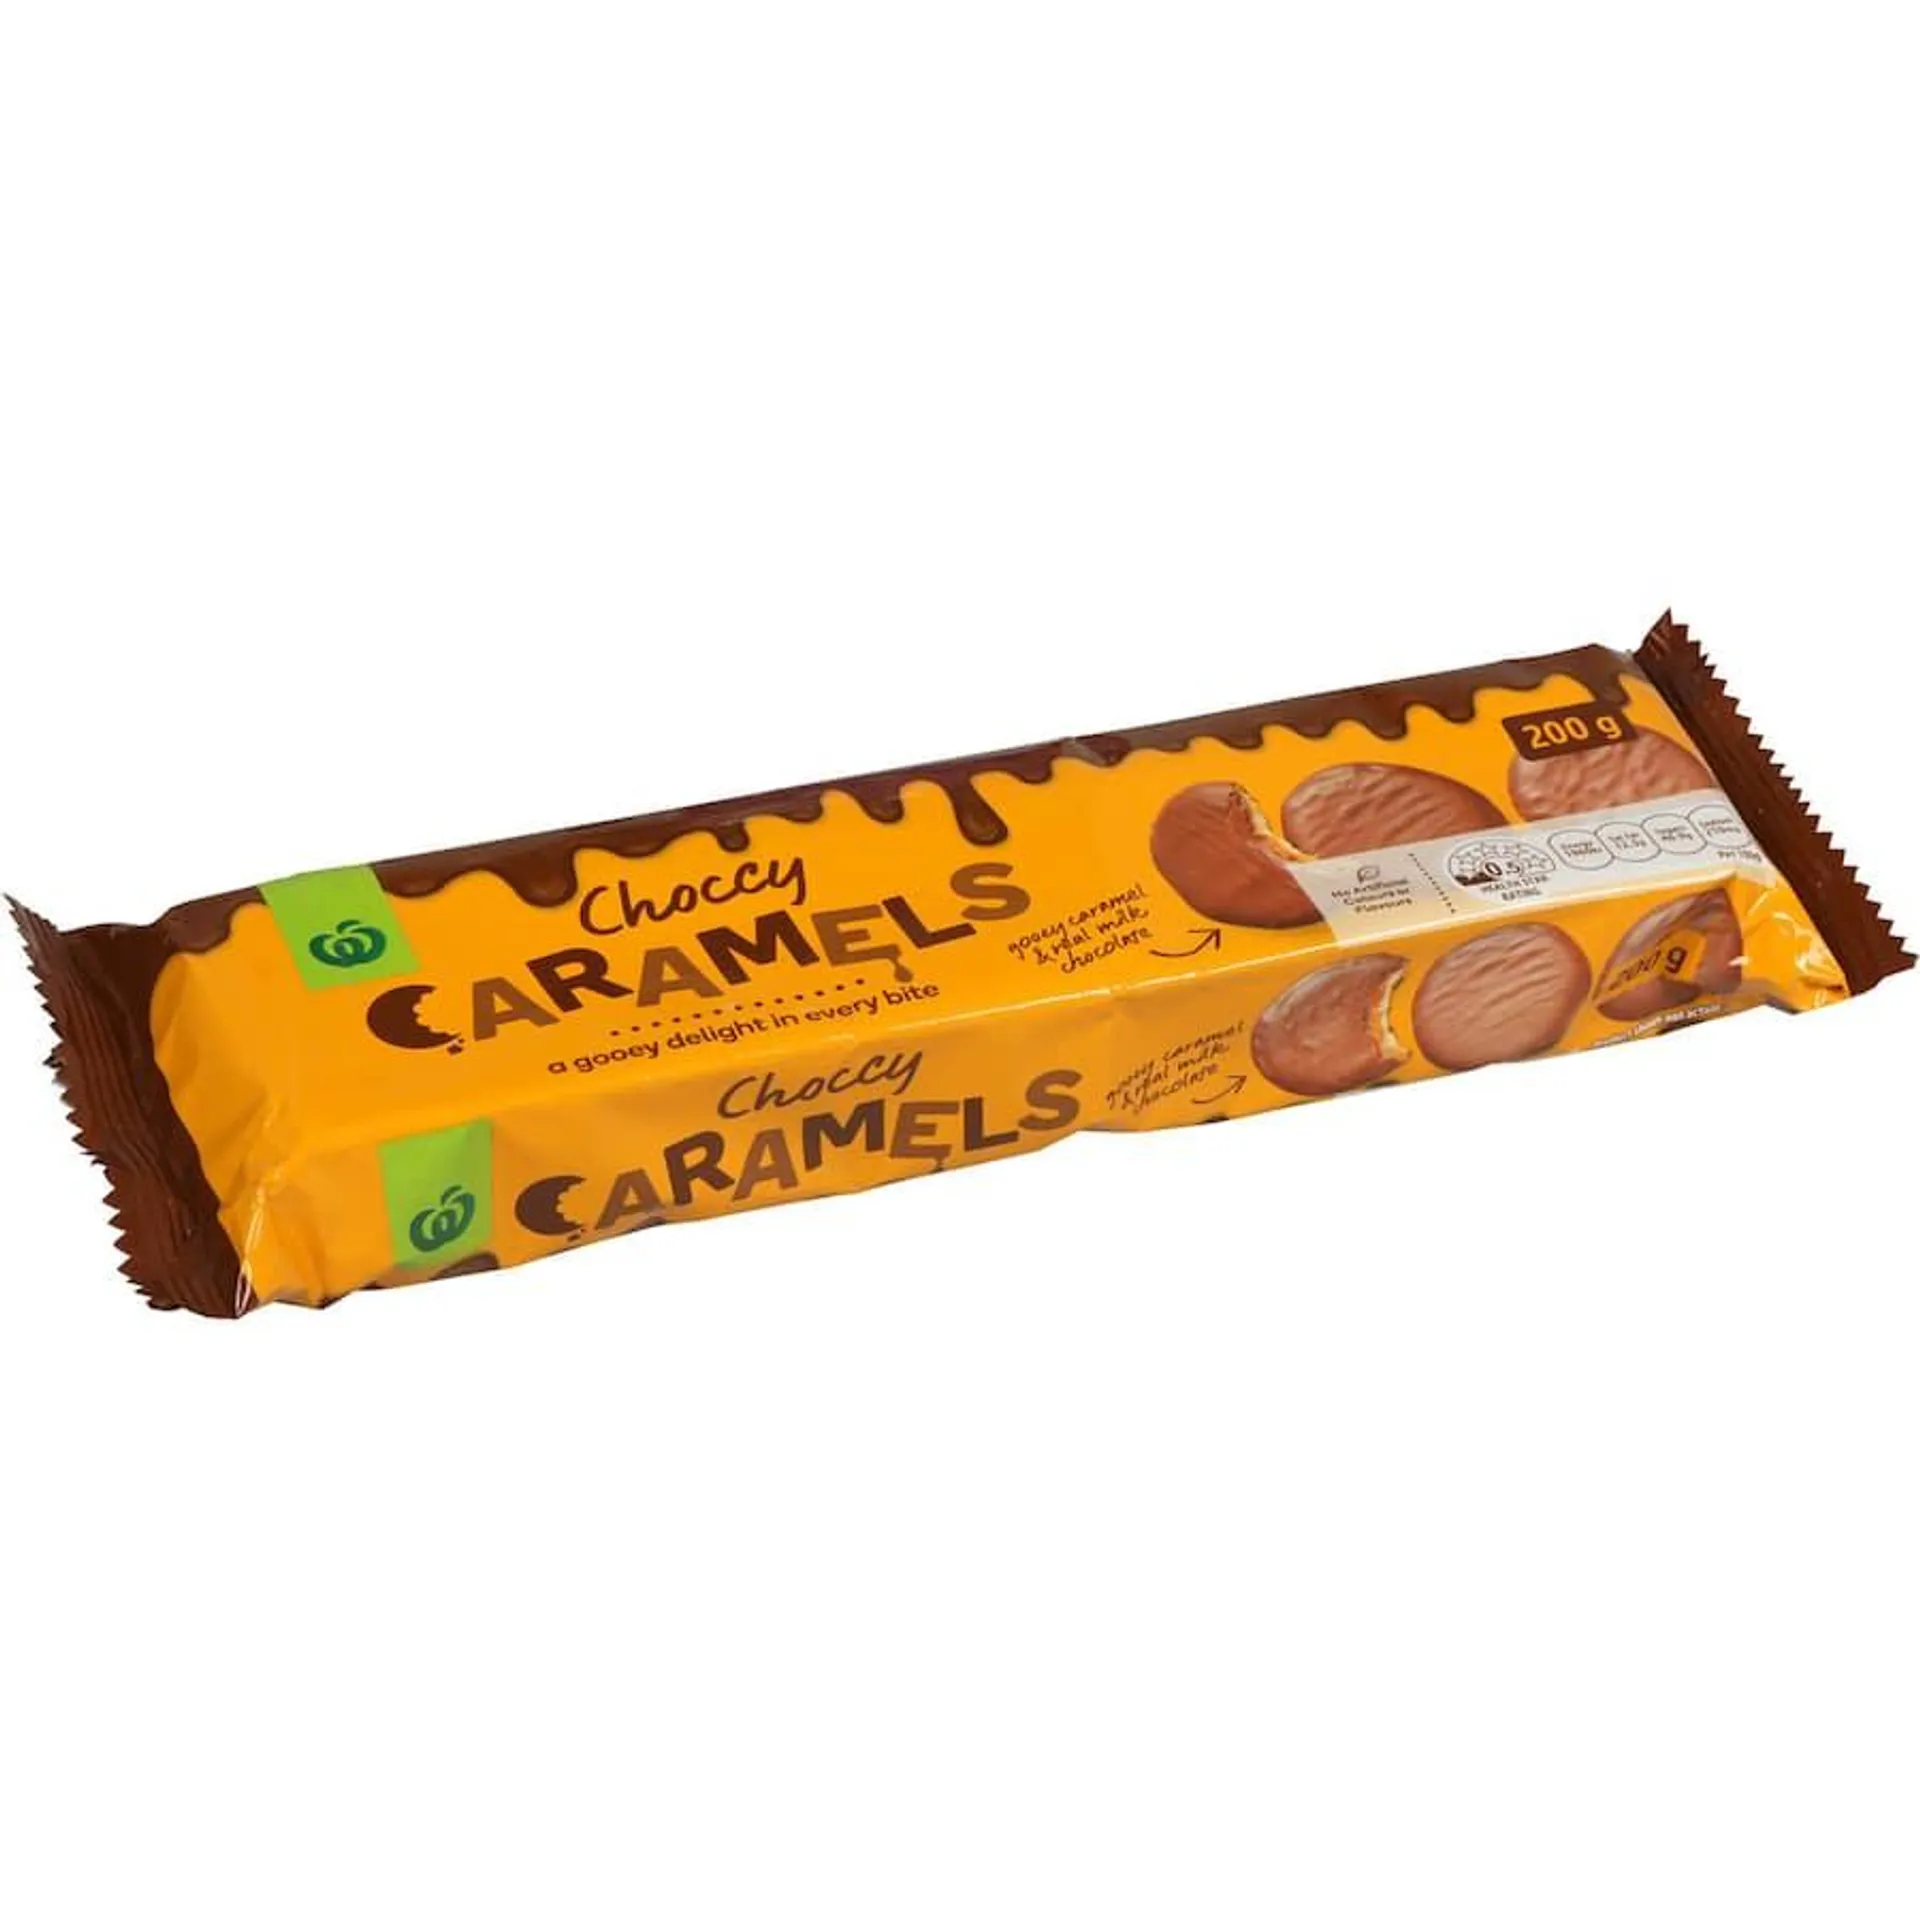 Woolworths Chocolate Biscuits Choccy Caramel